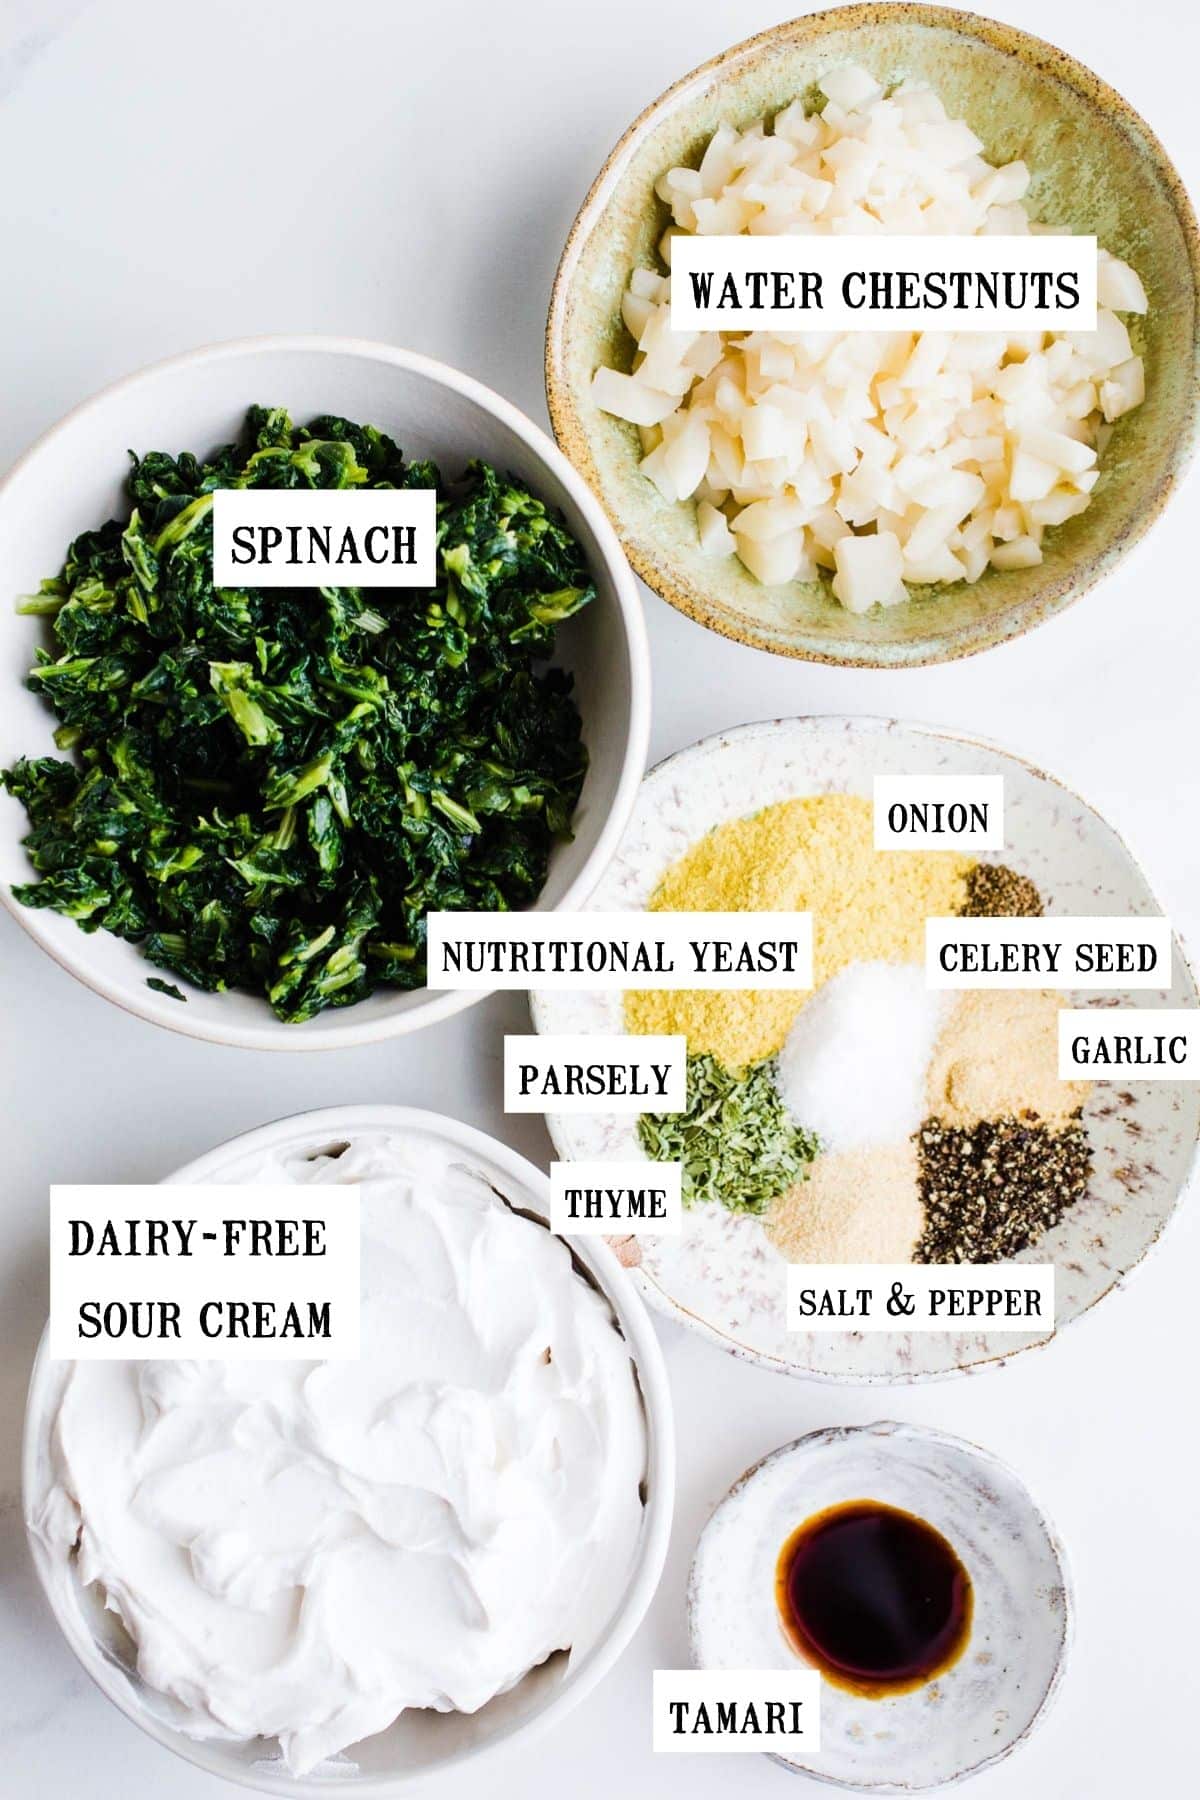 Ingredients for spinach dip in small bowls including spinach, water chestnuts, spices, sour cream, and tamari.